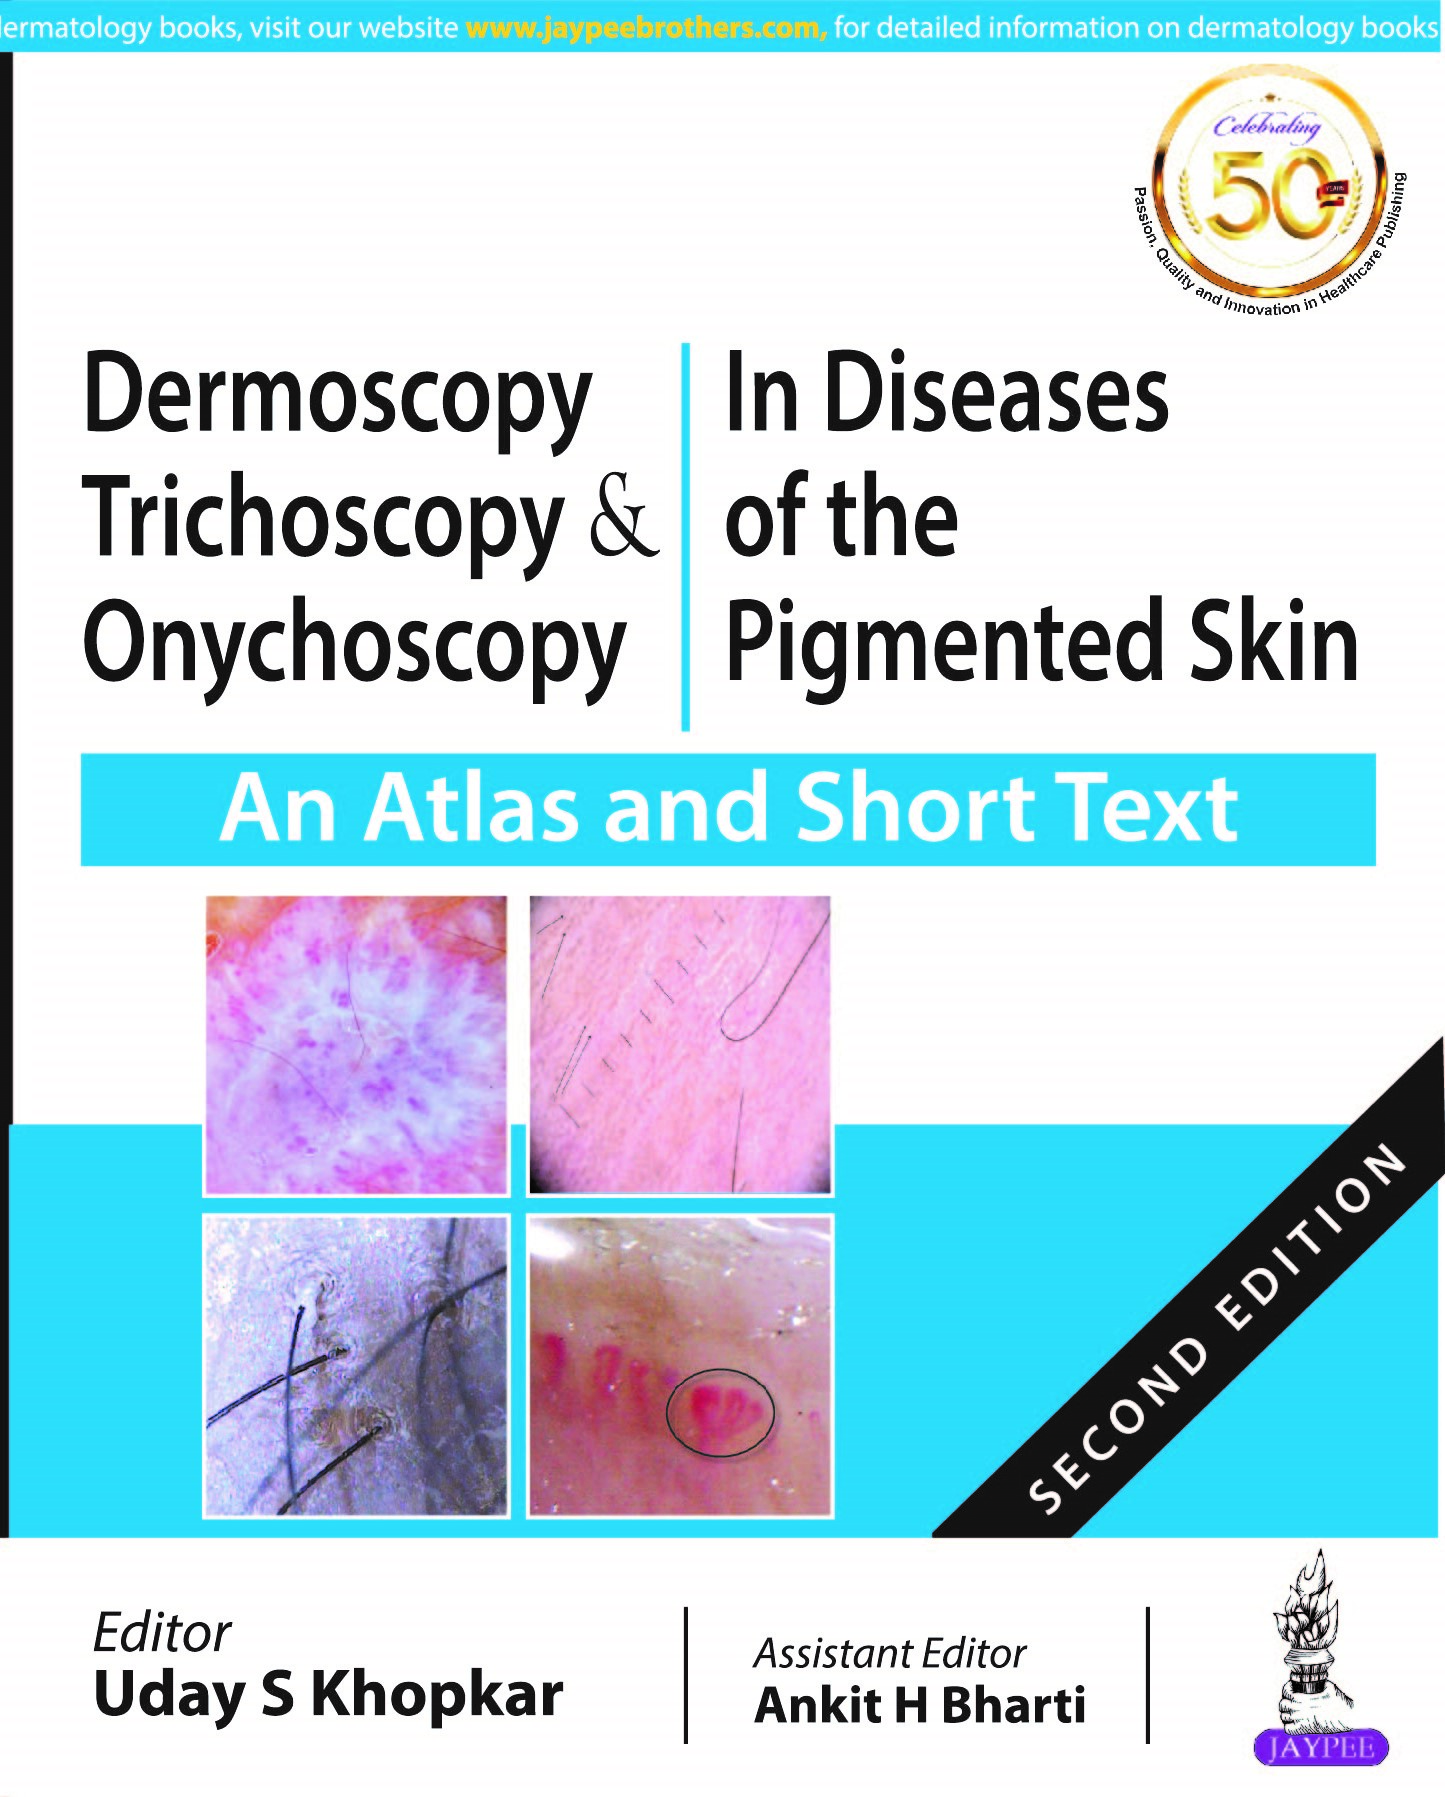 dermoscopy-trichoscopy-onychoscopy-in-diseases-of-the-pigmented-skin-an-atlas-and-short-text